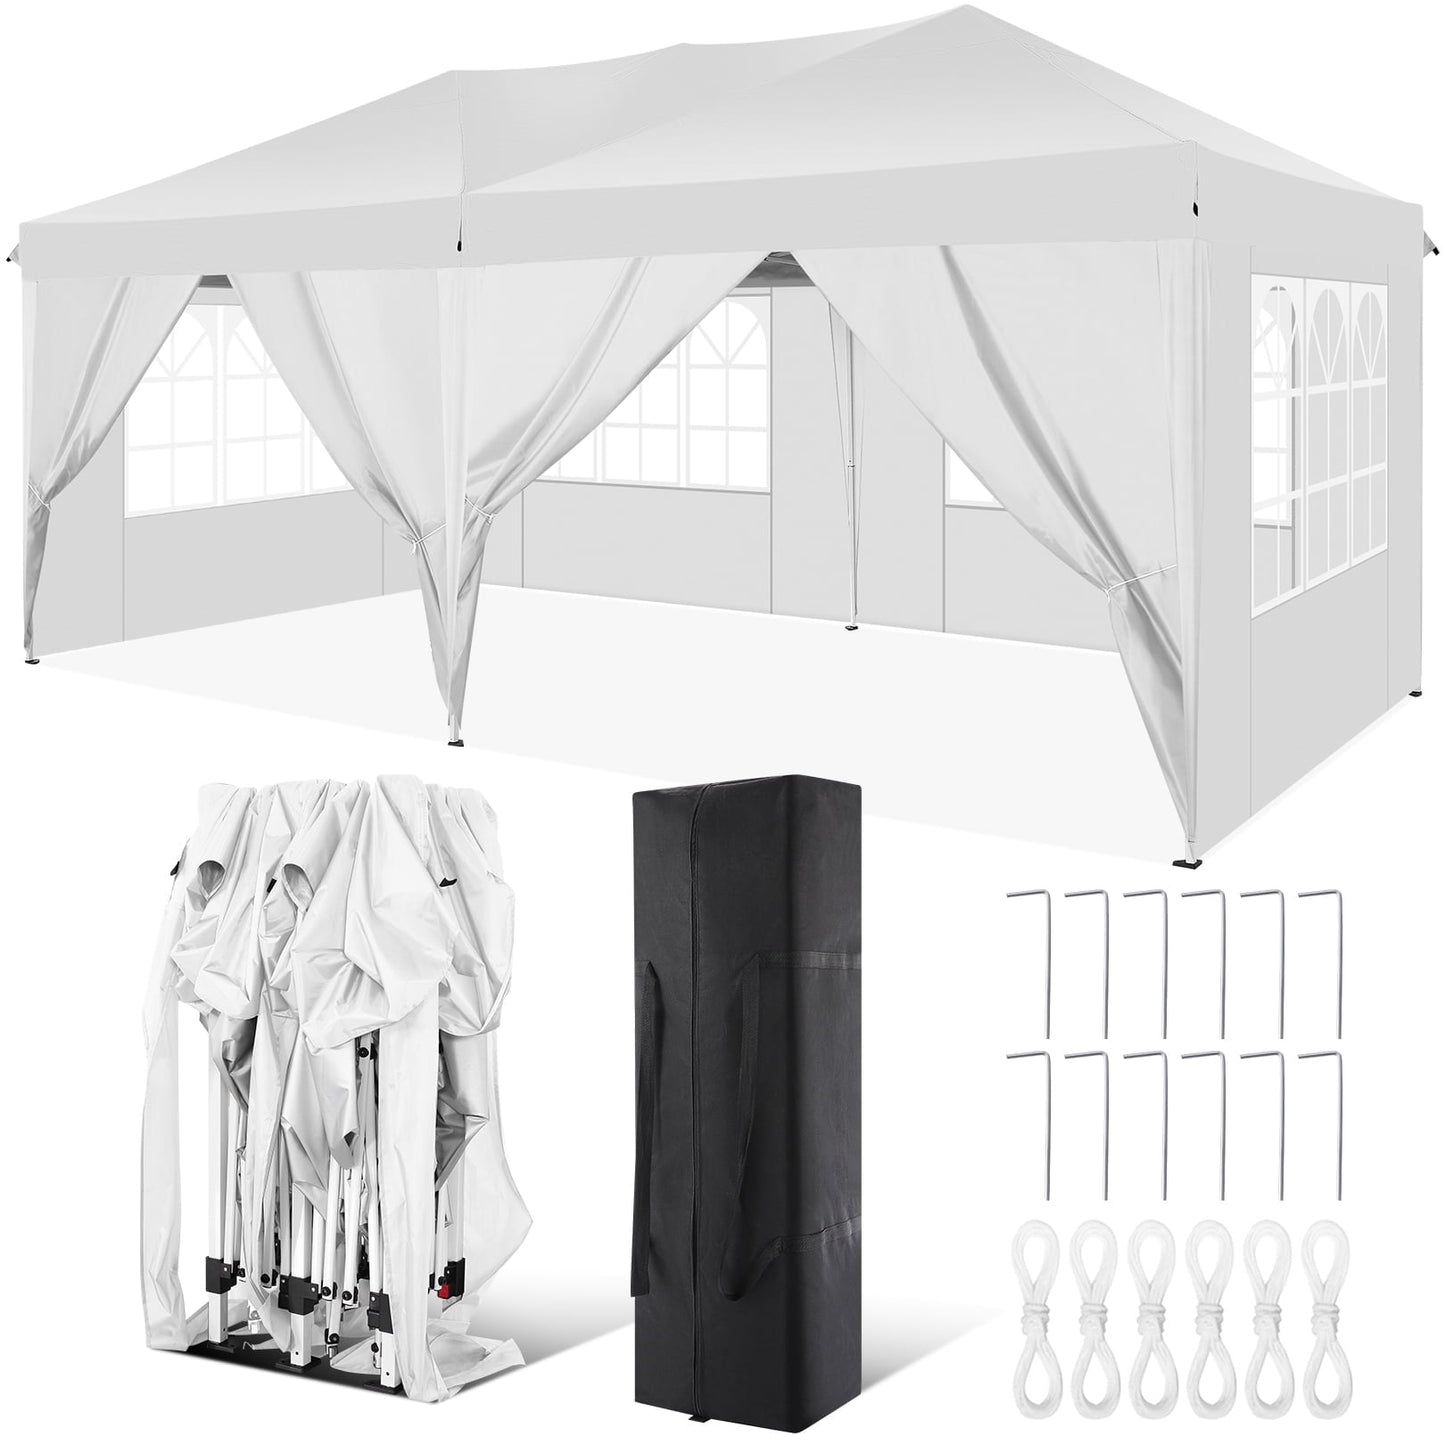 SANOPY 10' x 20' EZ Pop Up Canopy Tent Party Tent Outdoor Event Instant Tent Gazebo with 6 Removable Sidewalls and Carry Bag, White